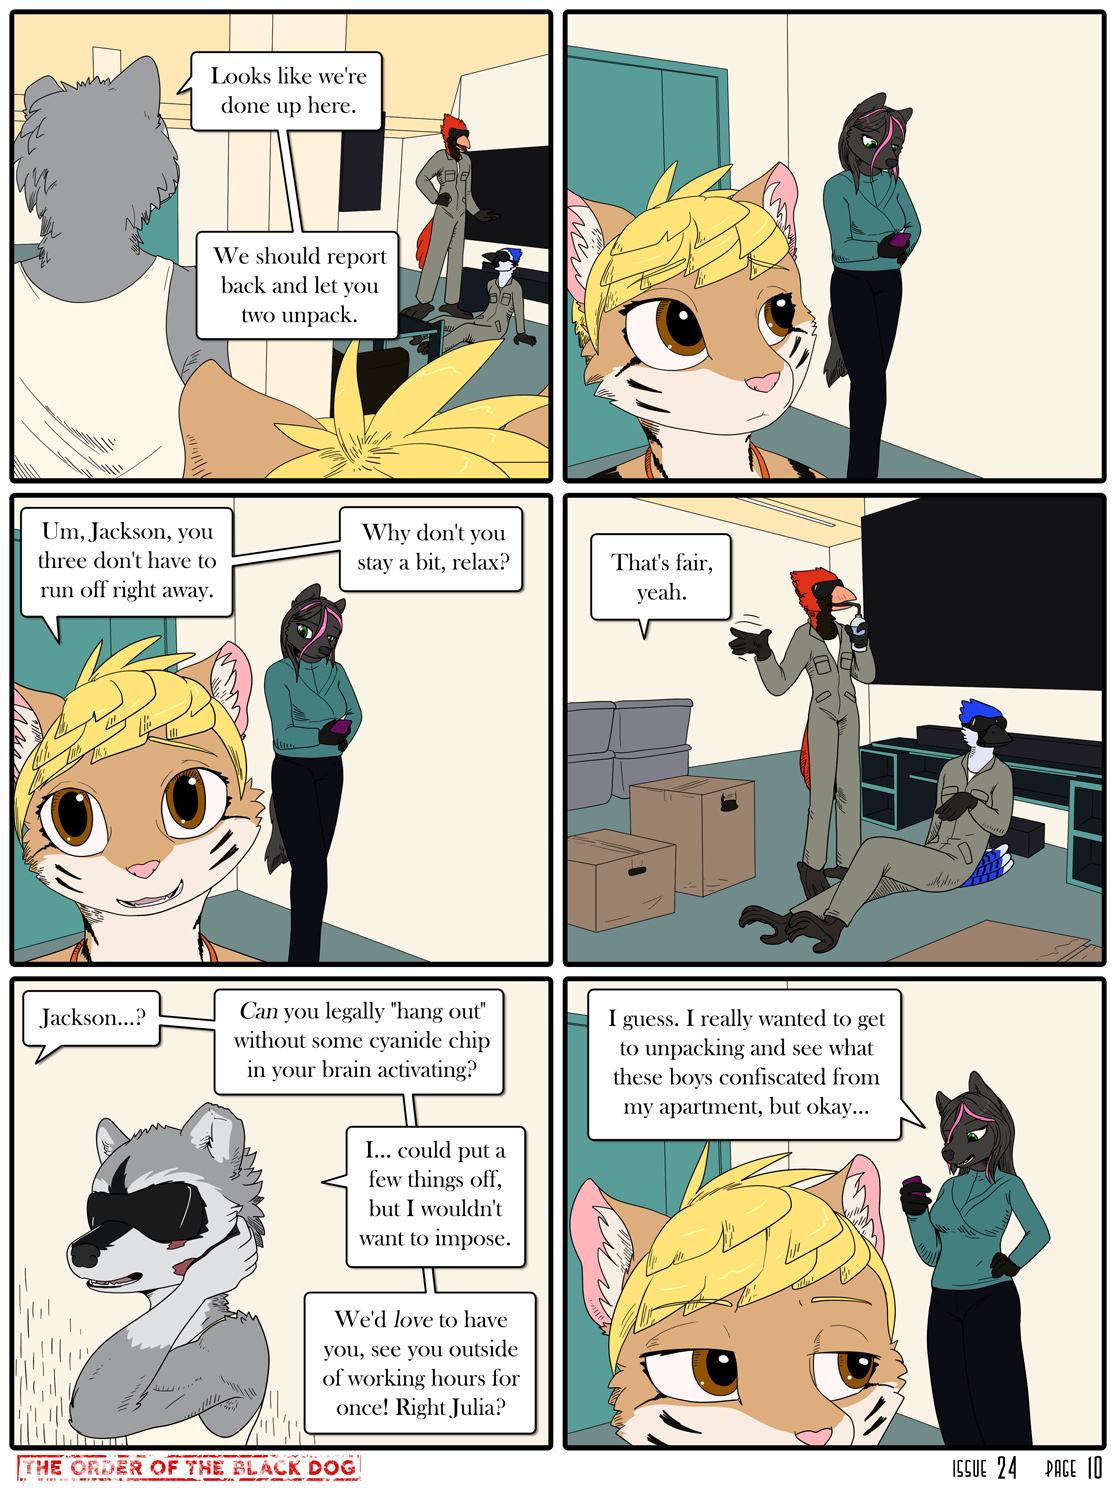 Issue 24, Page 10